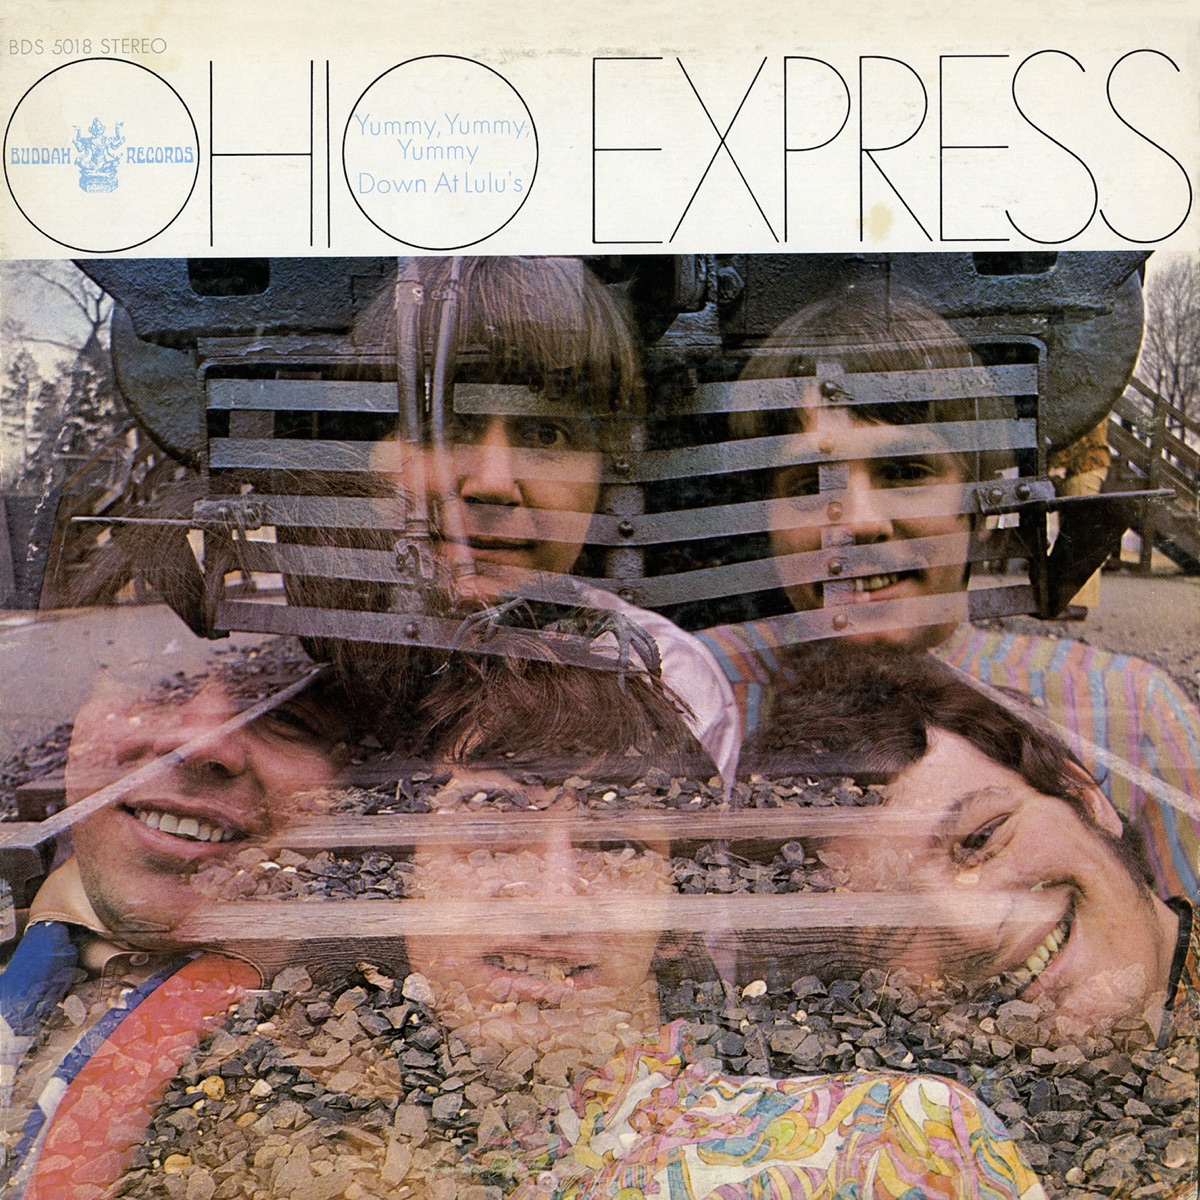 Simple Simon Says (Put Your Hands In the Air) - EP - Album by Ohio Express  - Apple Music